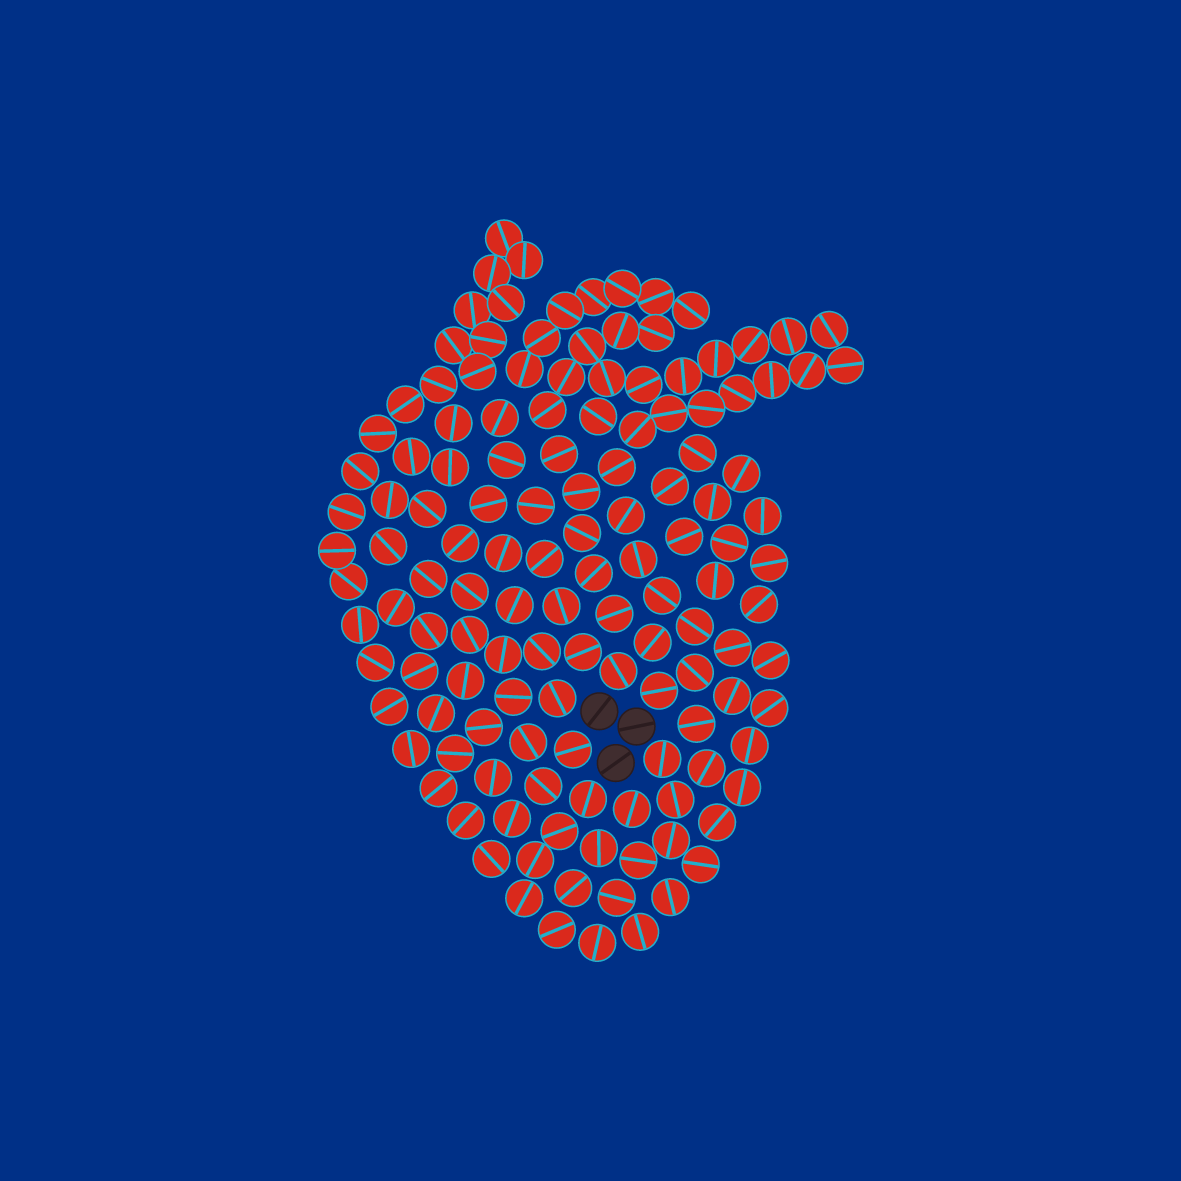 Sym bol of Heart With Blockage to Represent Chronic Heart Disease